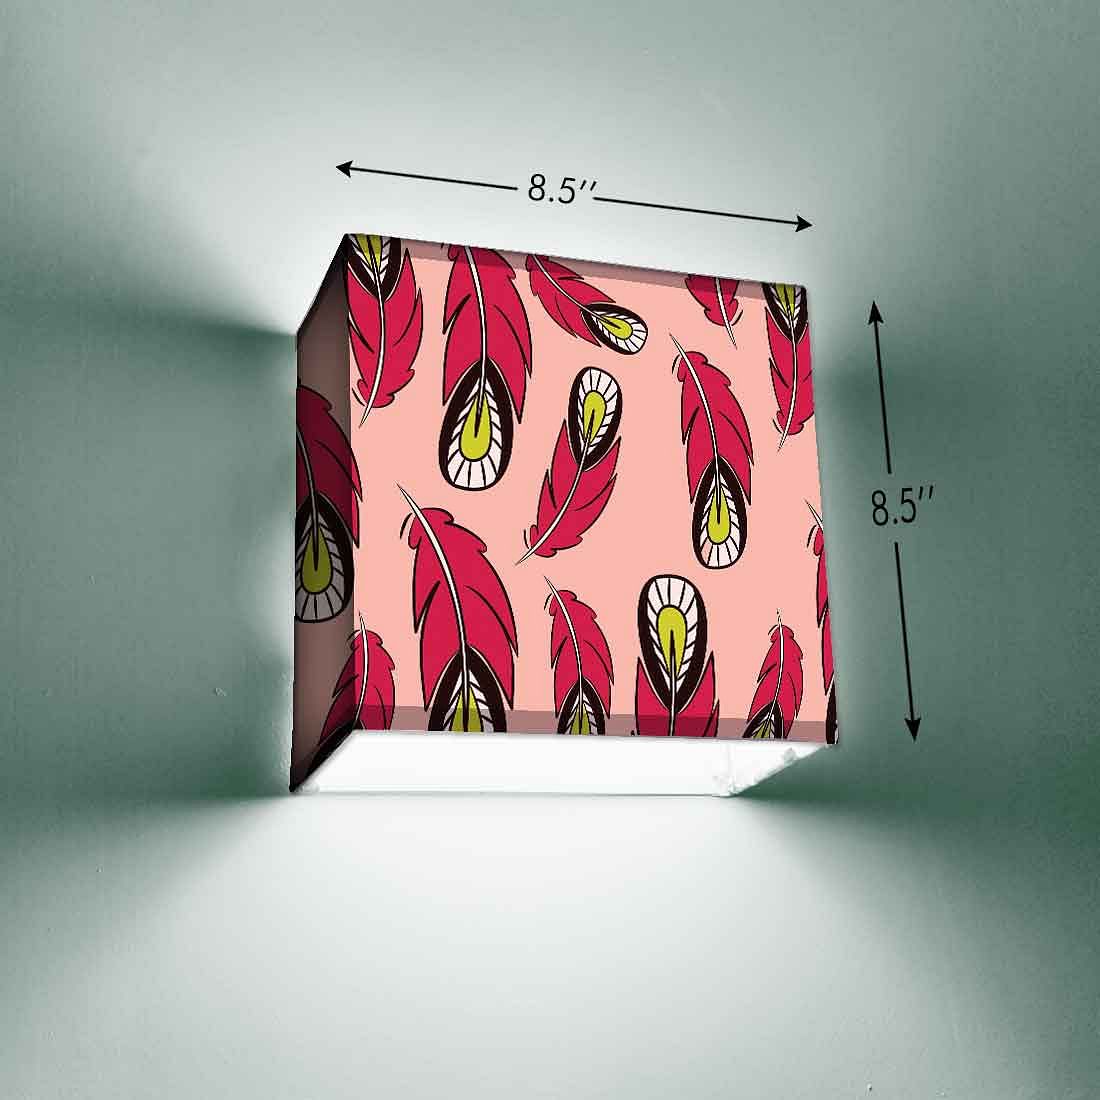 Wall Lamp Square Shaped Lights - Feather Nutcase